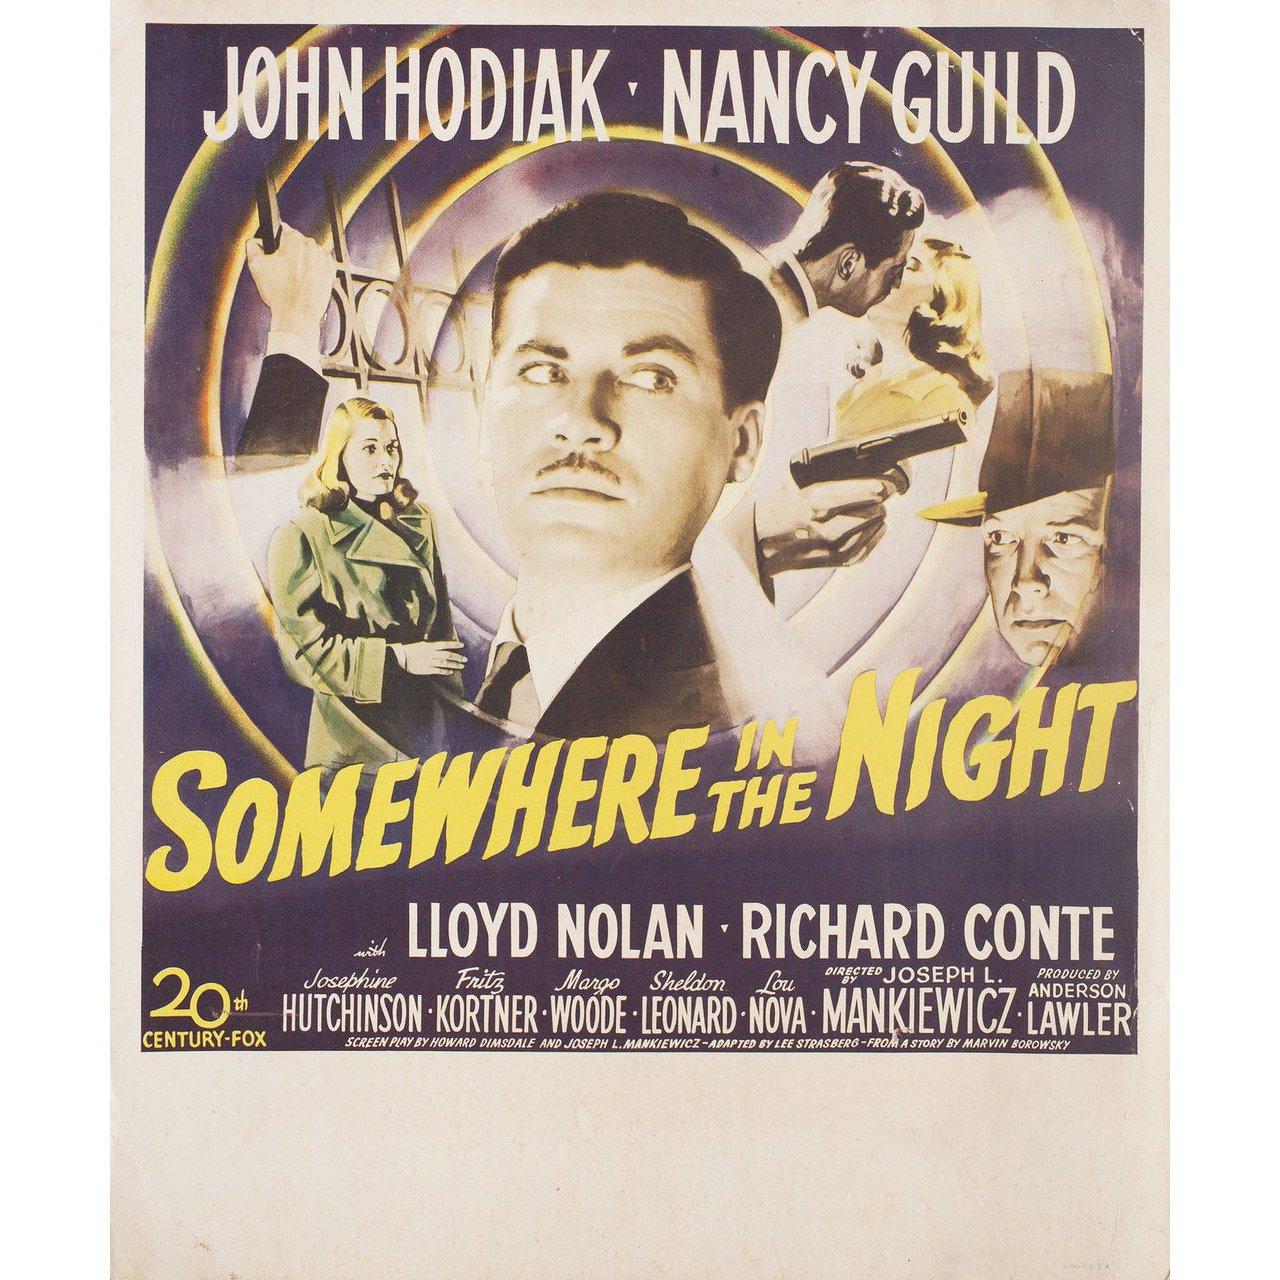 Original 1946 U.S. window card poster for the film Somewhere in the Night directed by Joseph L. Mankiewicz with John Hodiak / Nancy Guild / Lloyd Nolan / Richard Conte. Fair-Good condition, folded. Many original posters were issued folded or were